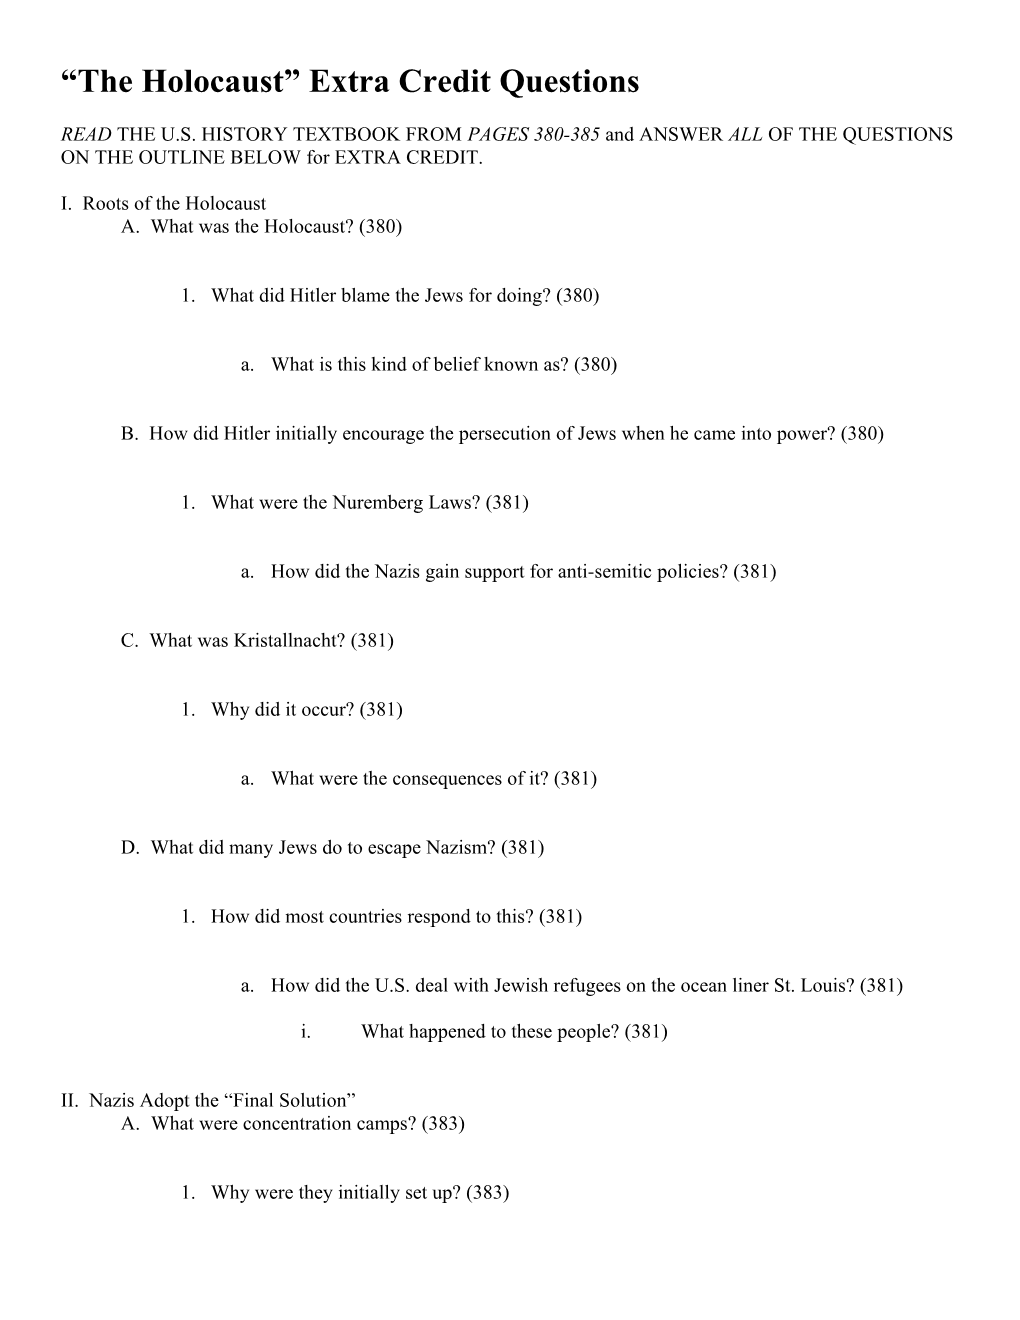 The Holocaust Extra Credit Questions